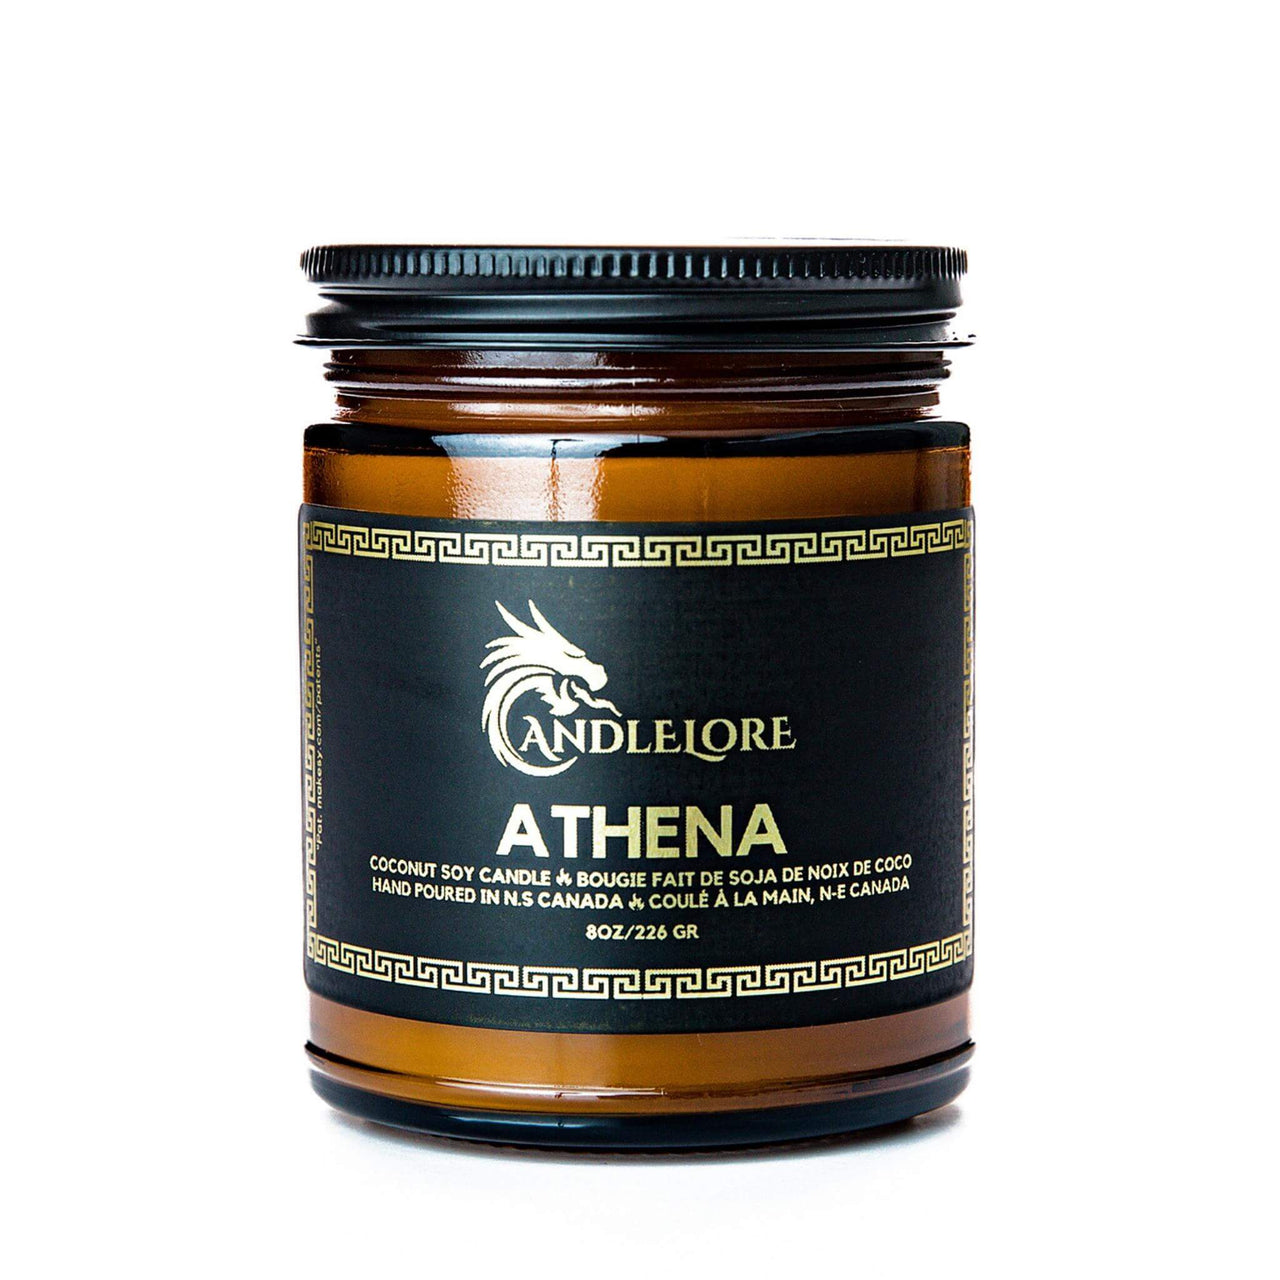 Medium Athena scented candle on a white background